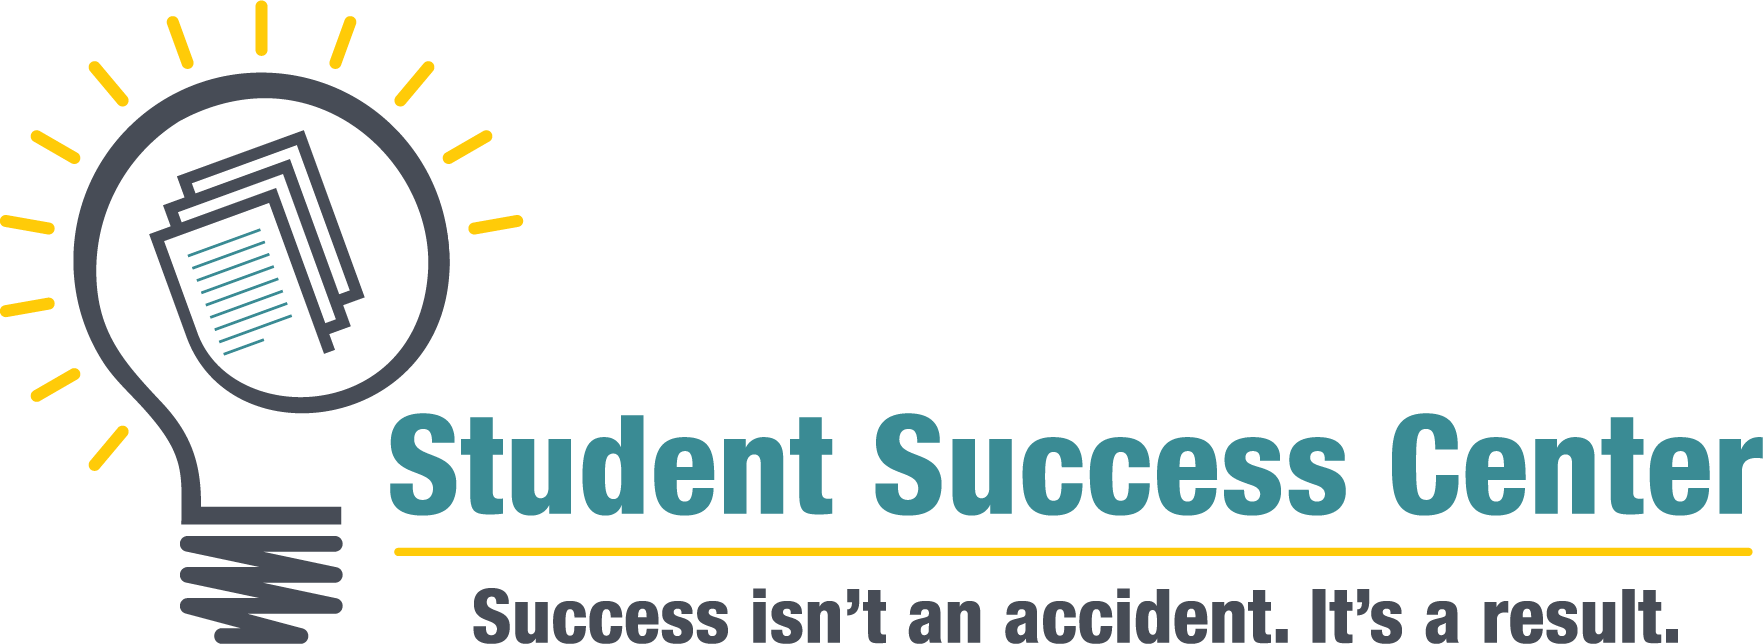 Student Success Center - Success isn't an accident. It's a result